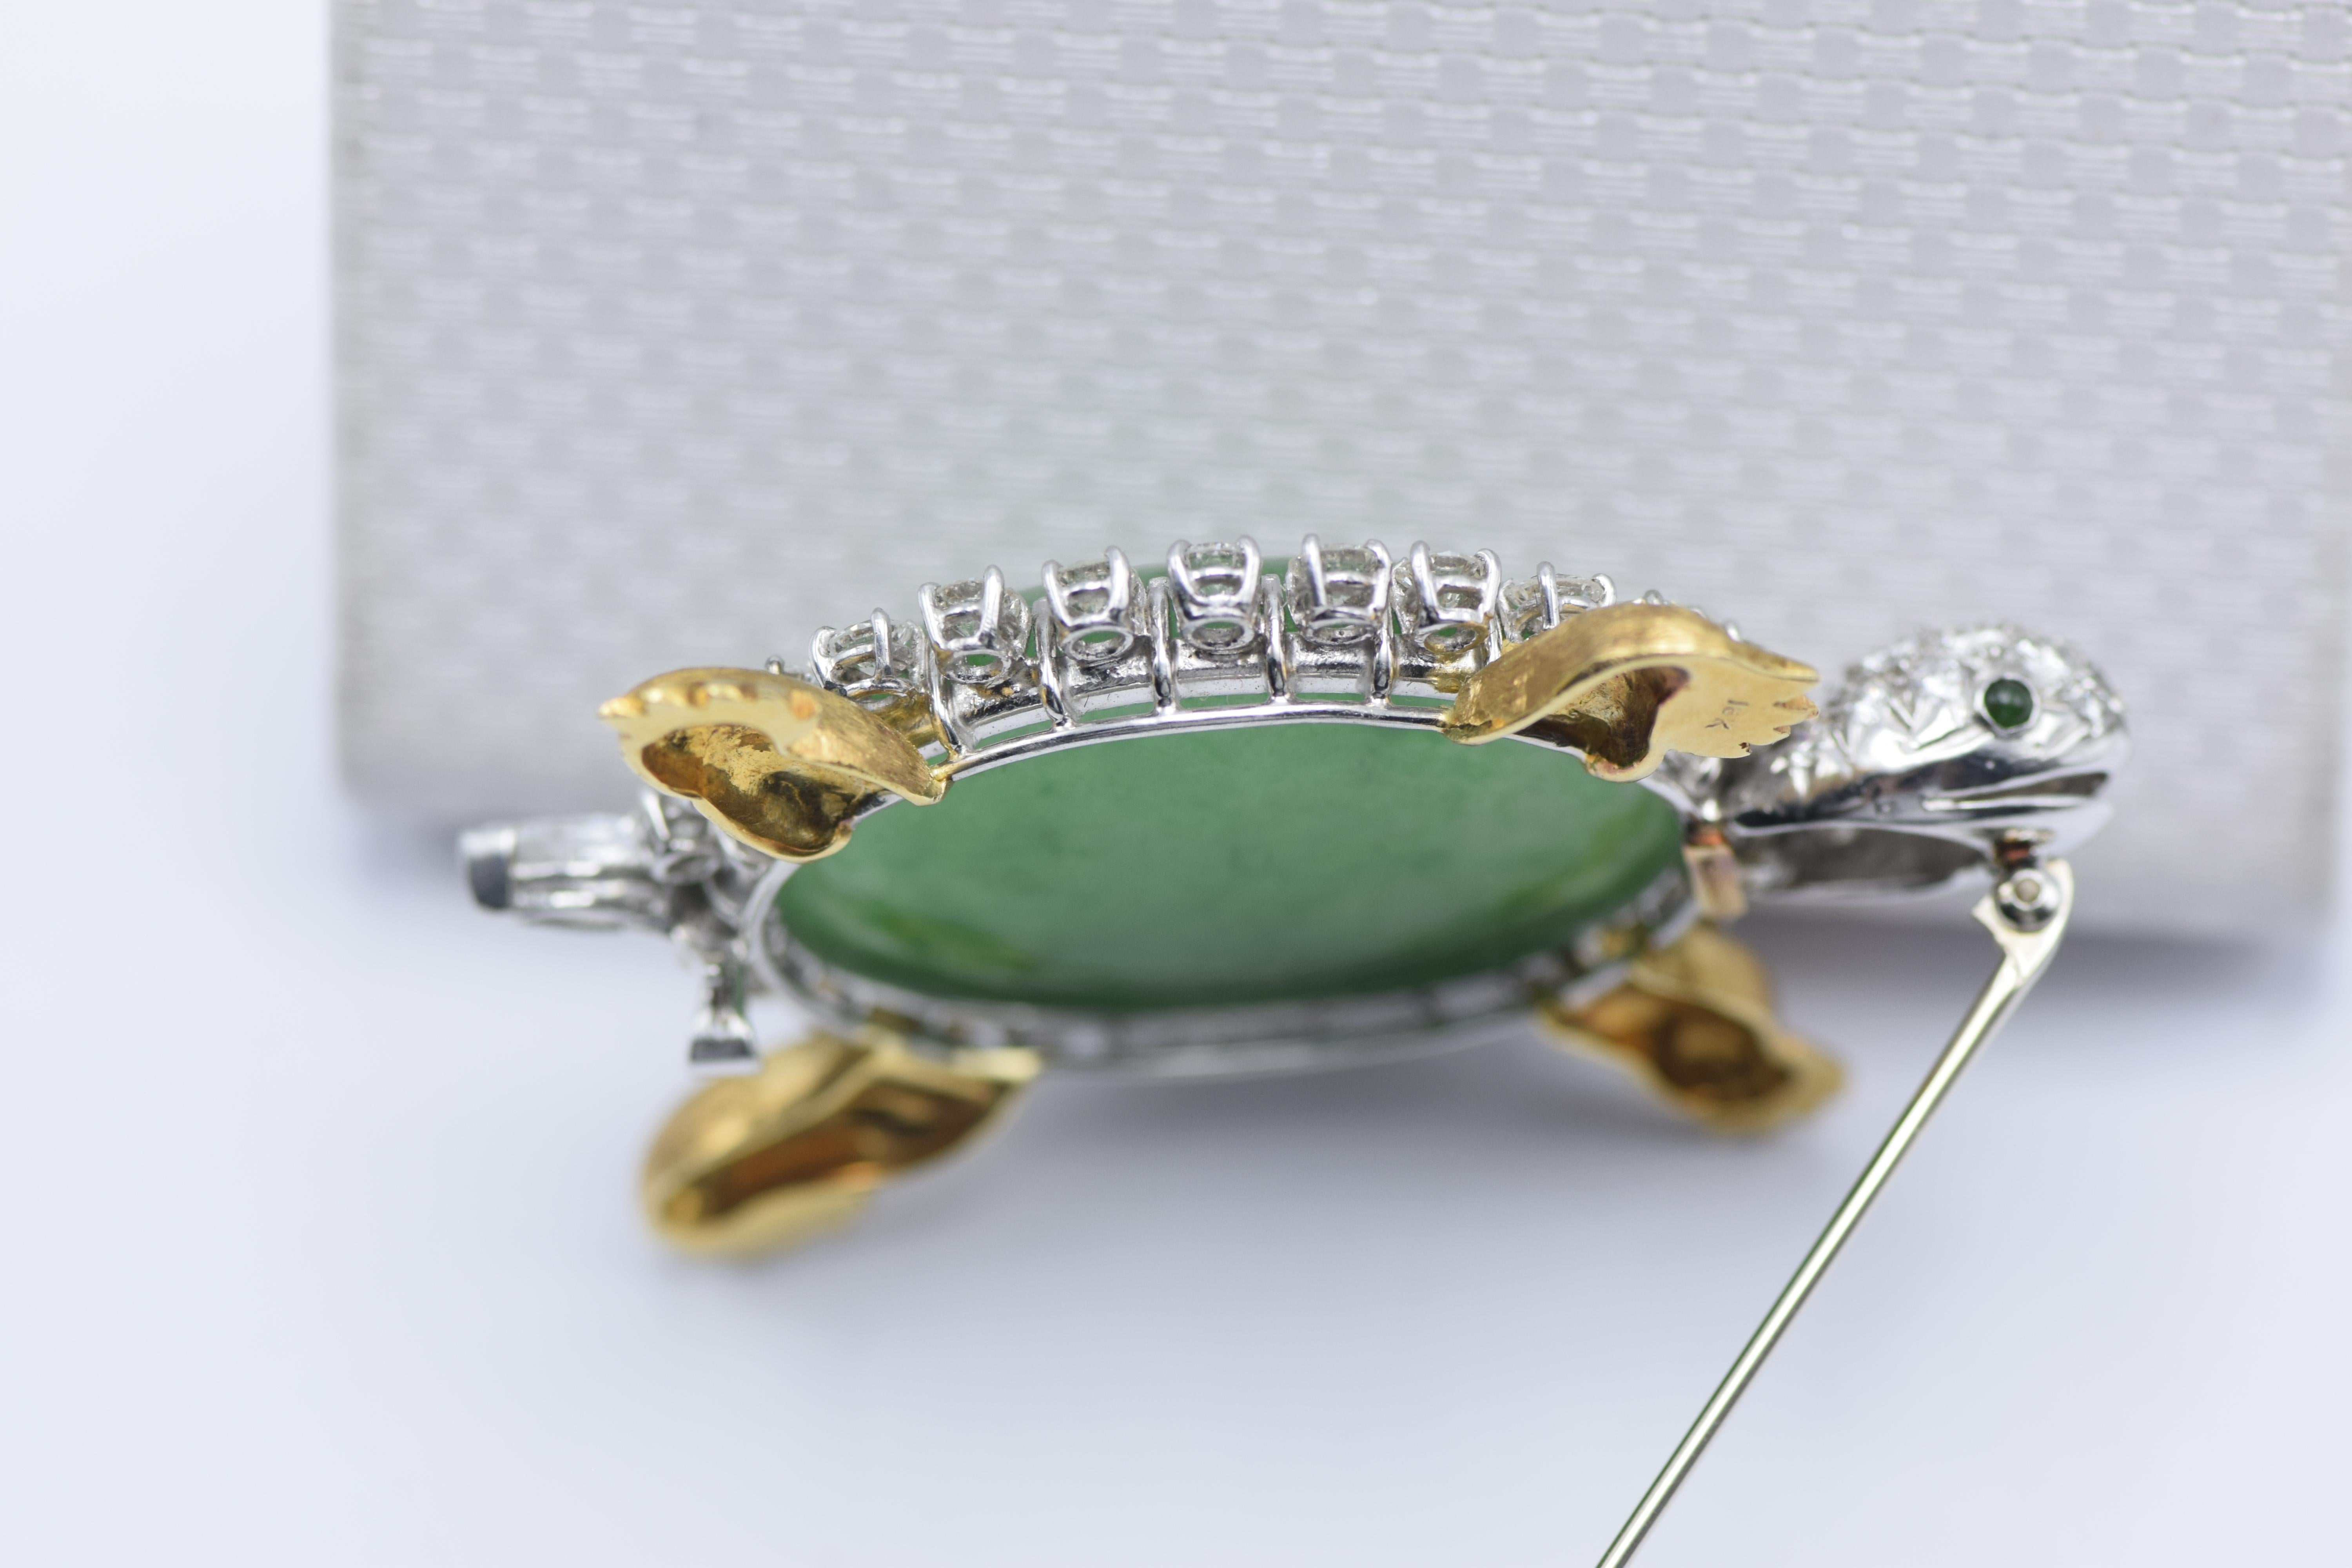 
A Jadeite Jade, Diamond and 18k gold turtle brooch
signed Wedderien; estimated total diamond weight: 4.25cts; dimensions: 1 3/4 x 2 1/2in.
